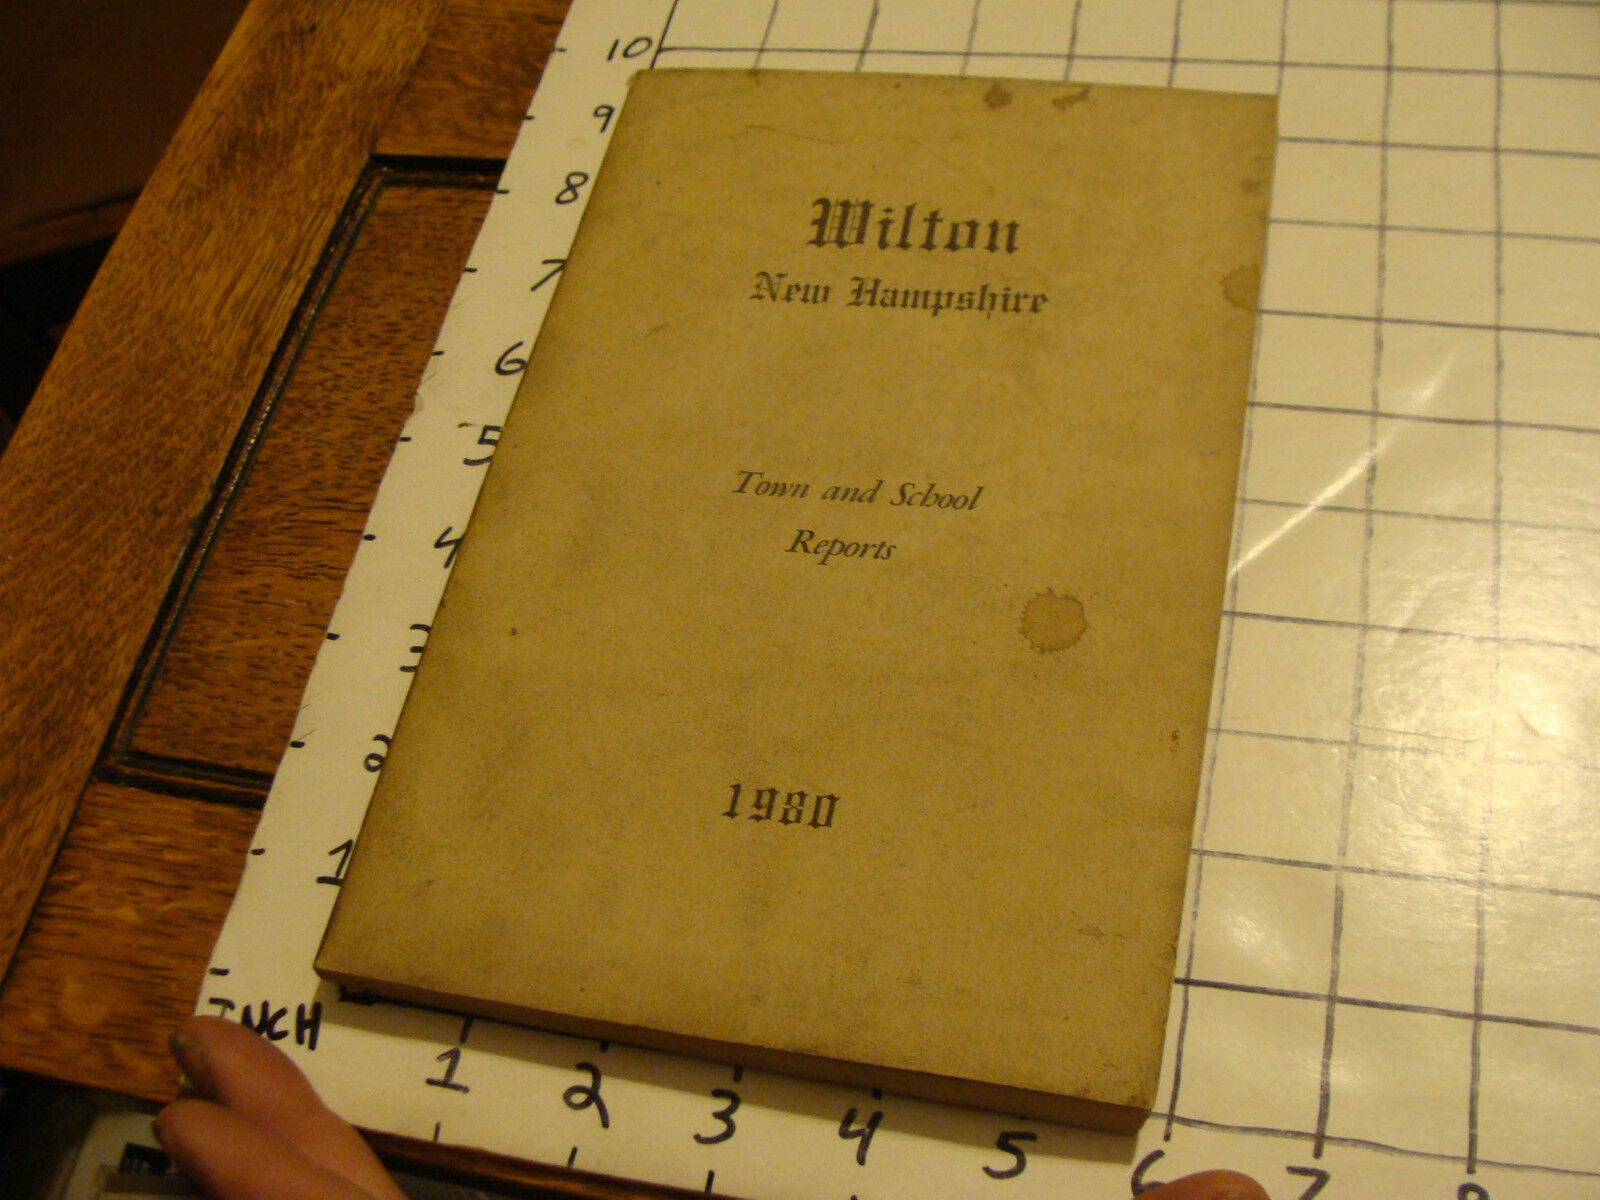 WILTON NEW HAMPSHRIE town and school reports 1980, stained cover, 